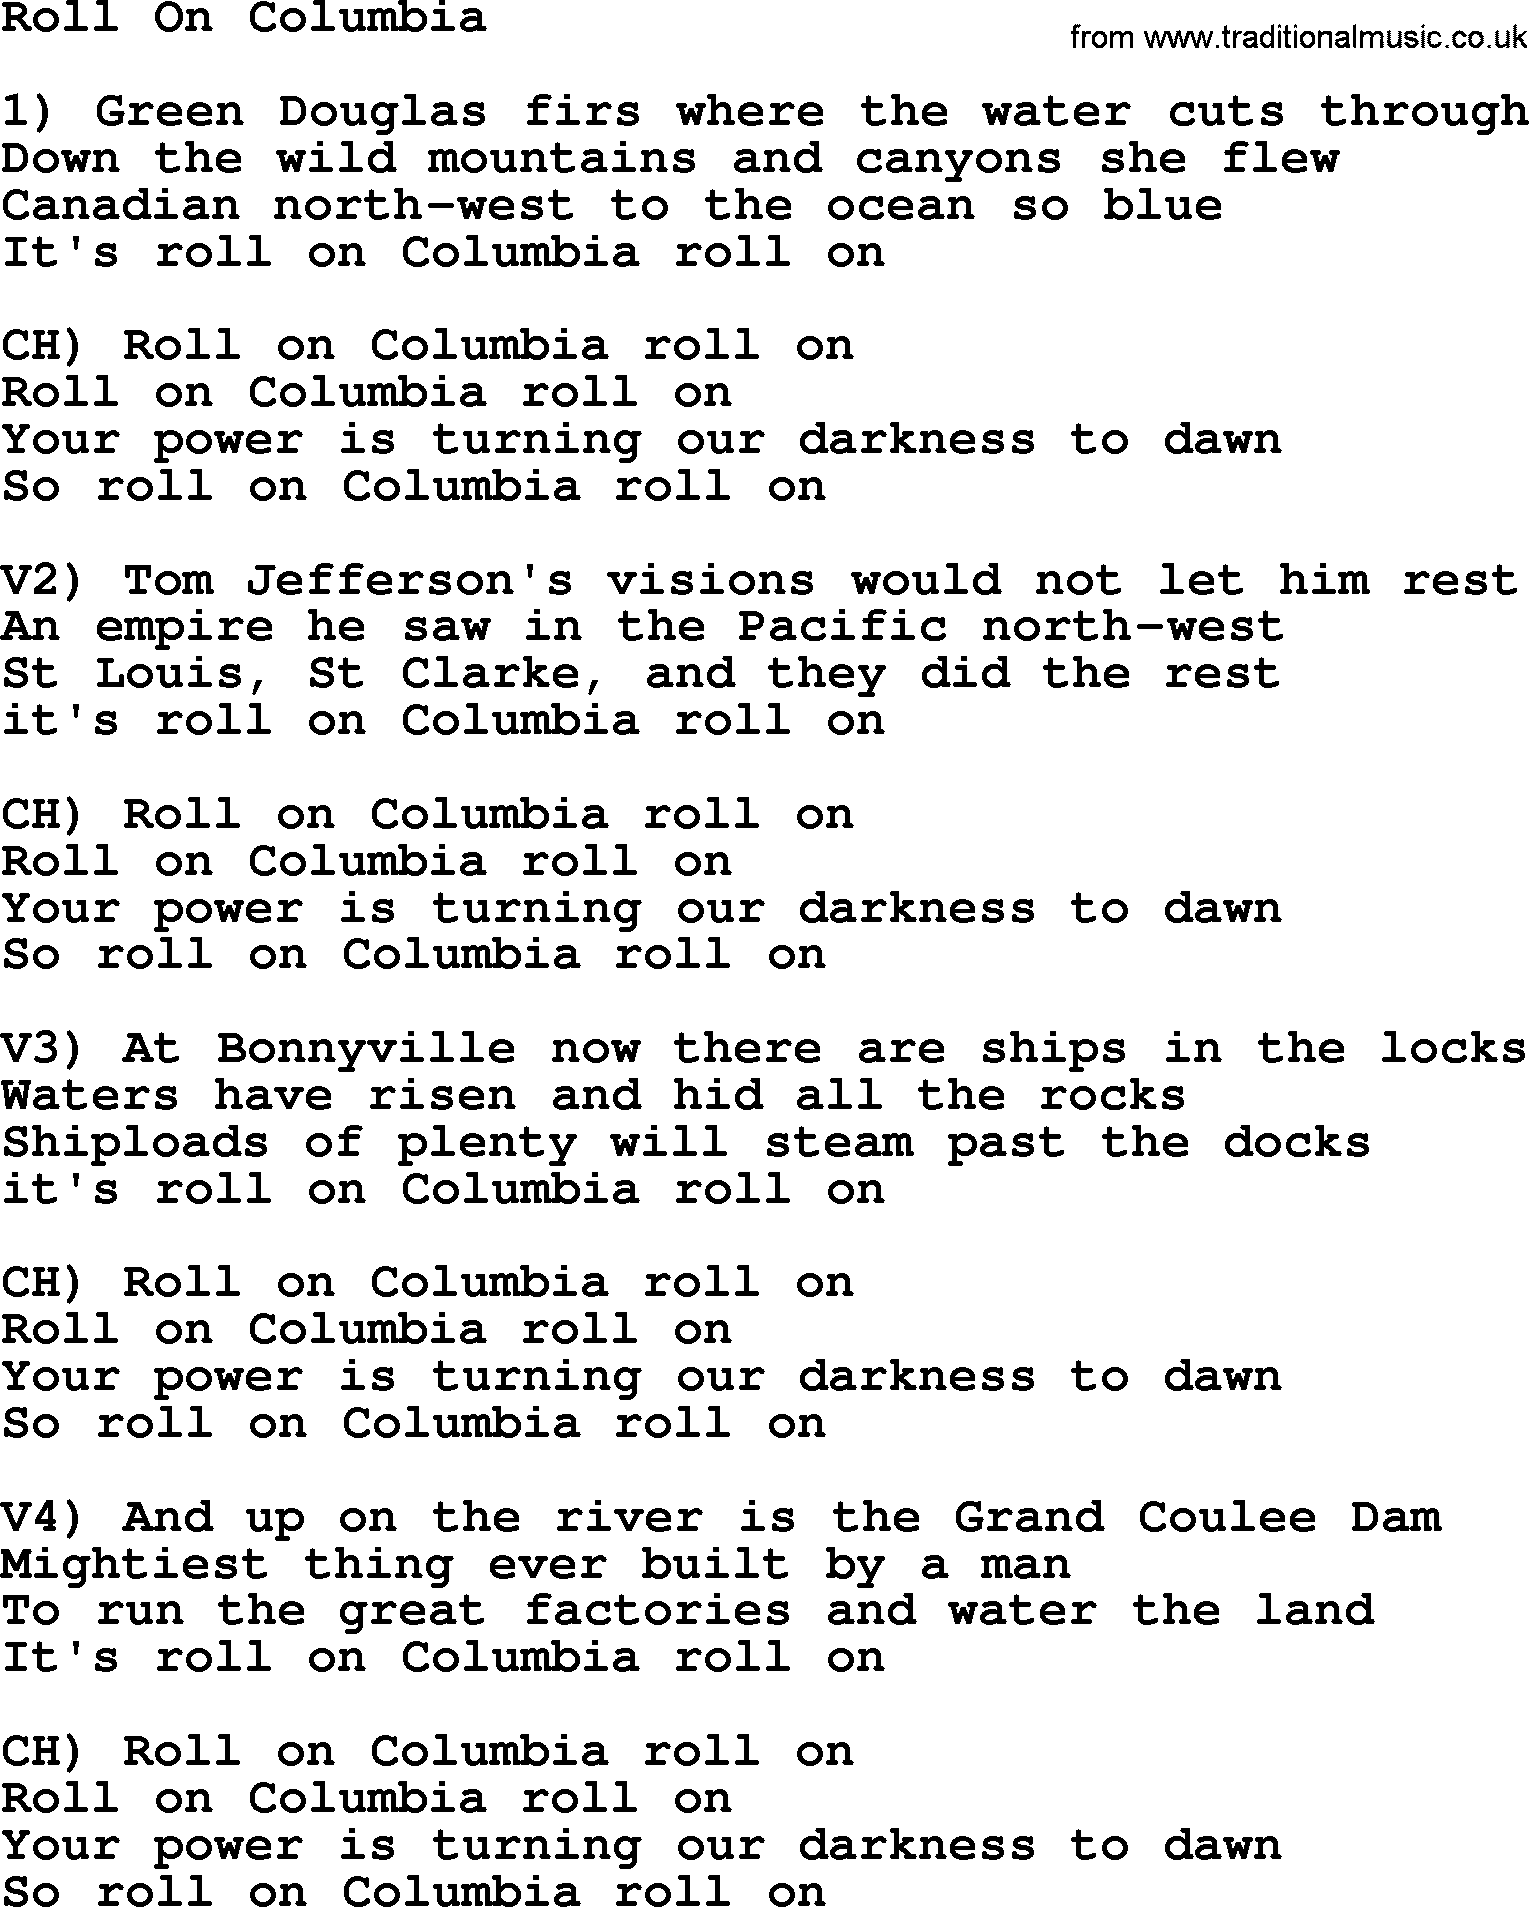 Woody Guthrie song Roll On Columbia lyrics